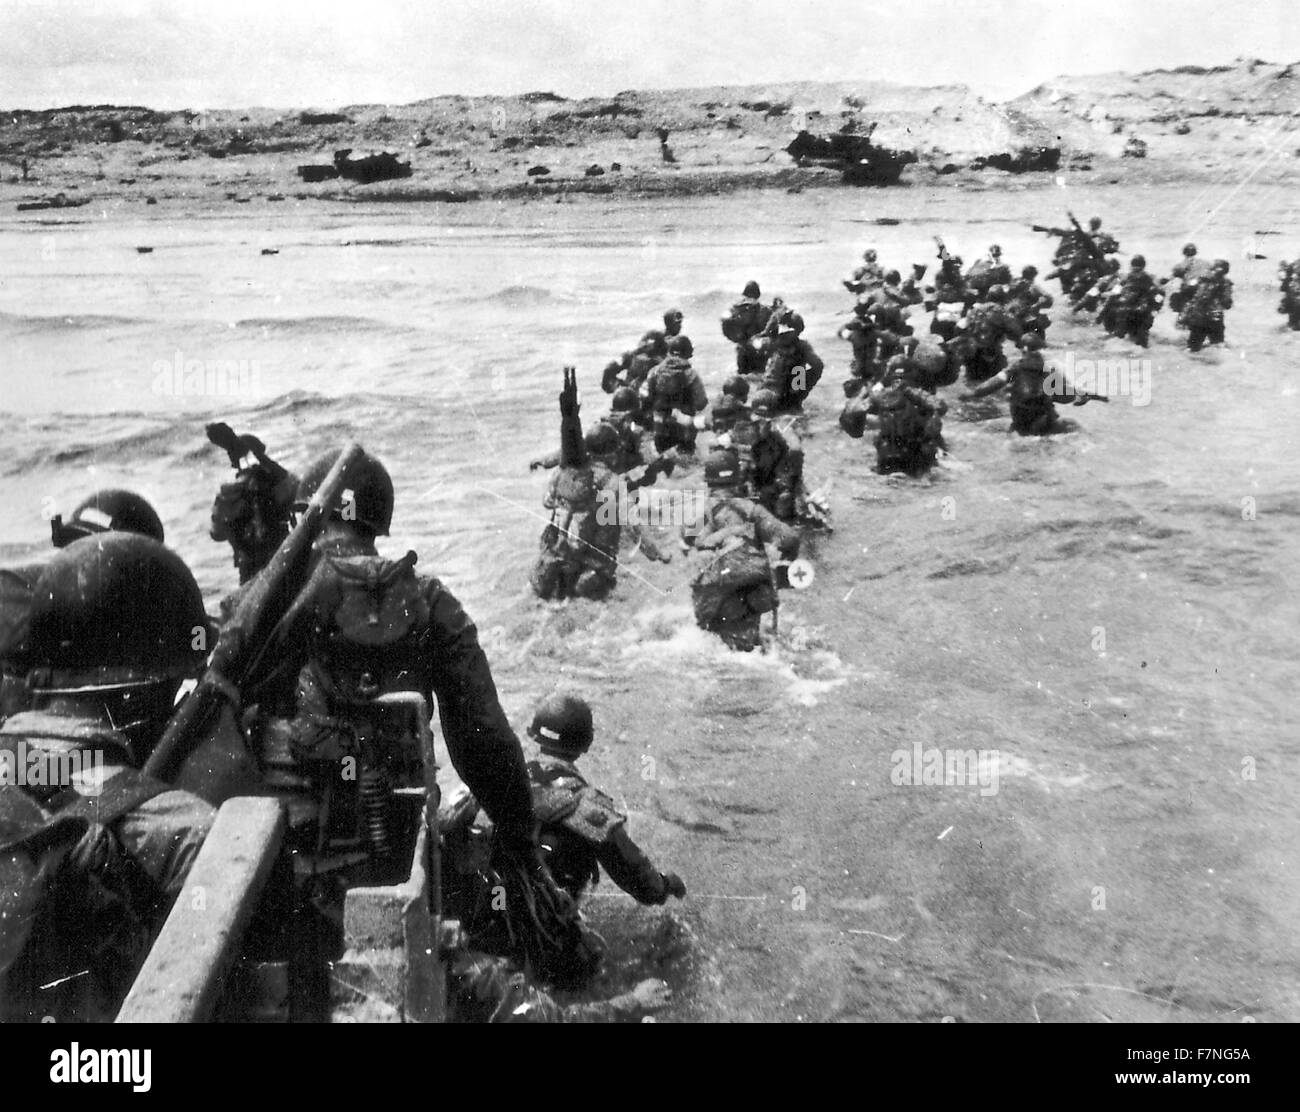 American forces land at Utah Beach; France 1944. Utah Beach was the cofe name for one of the five sectors of the Allied invasion of German-occupied France in the Normandy landings on June 6, 1944, during World War  II. Stock Photo